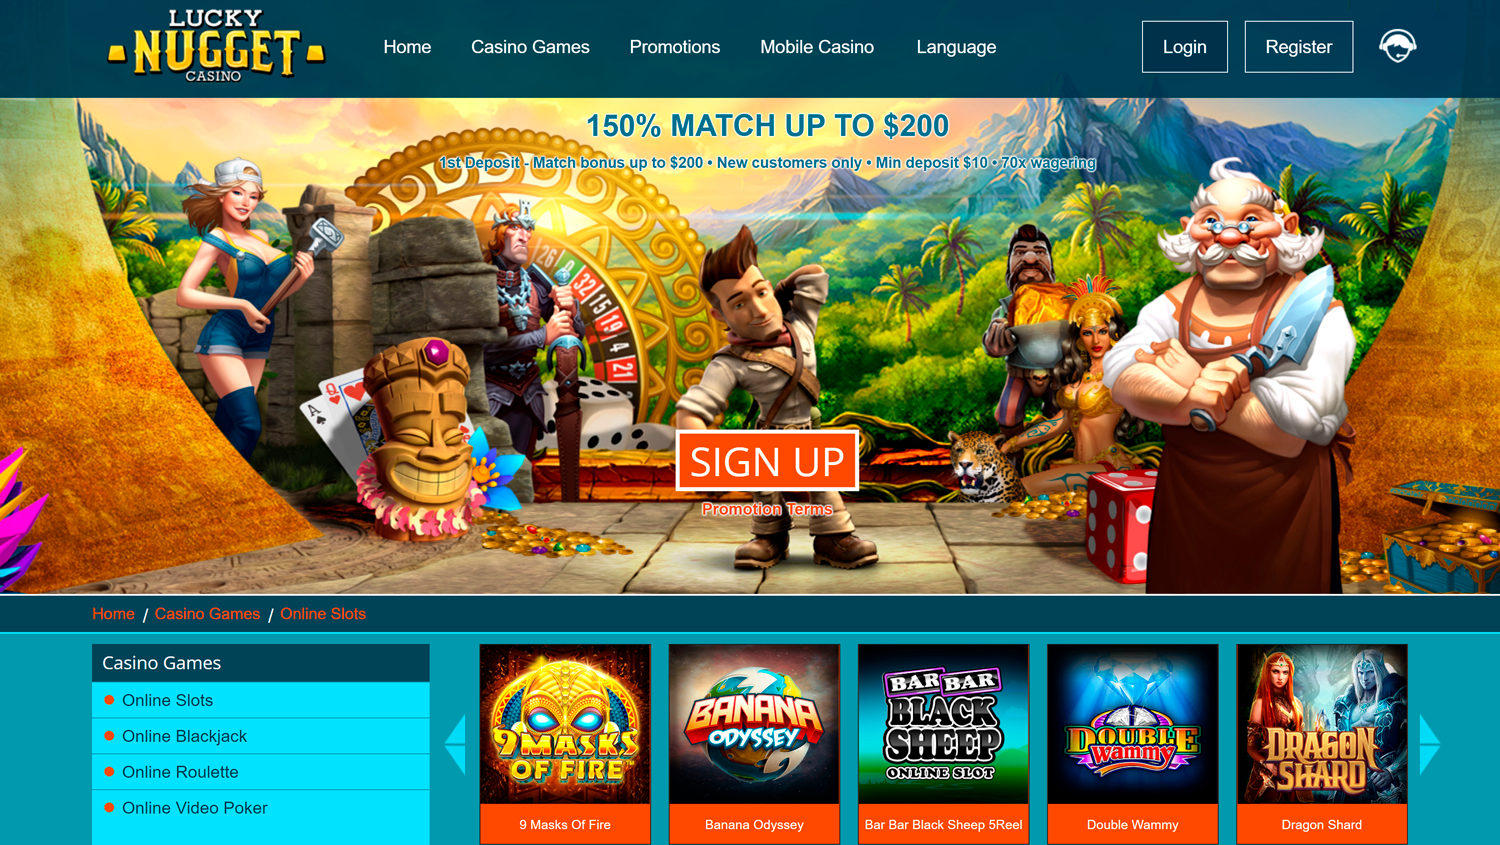 Slots on Lucky Nugget Casino site